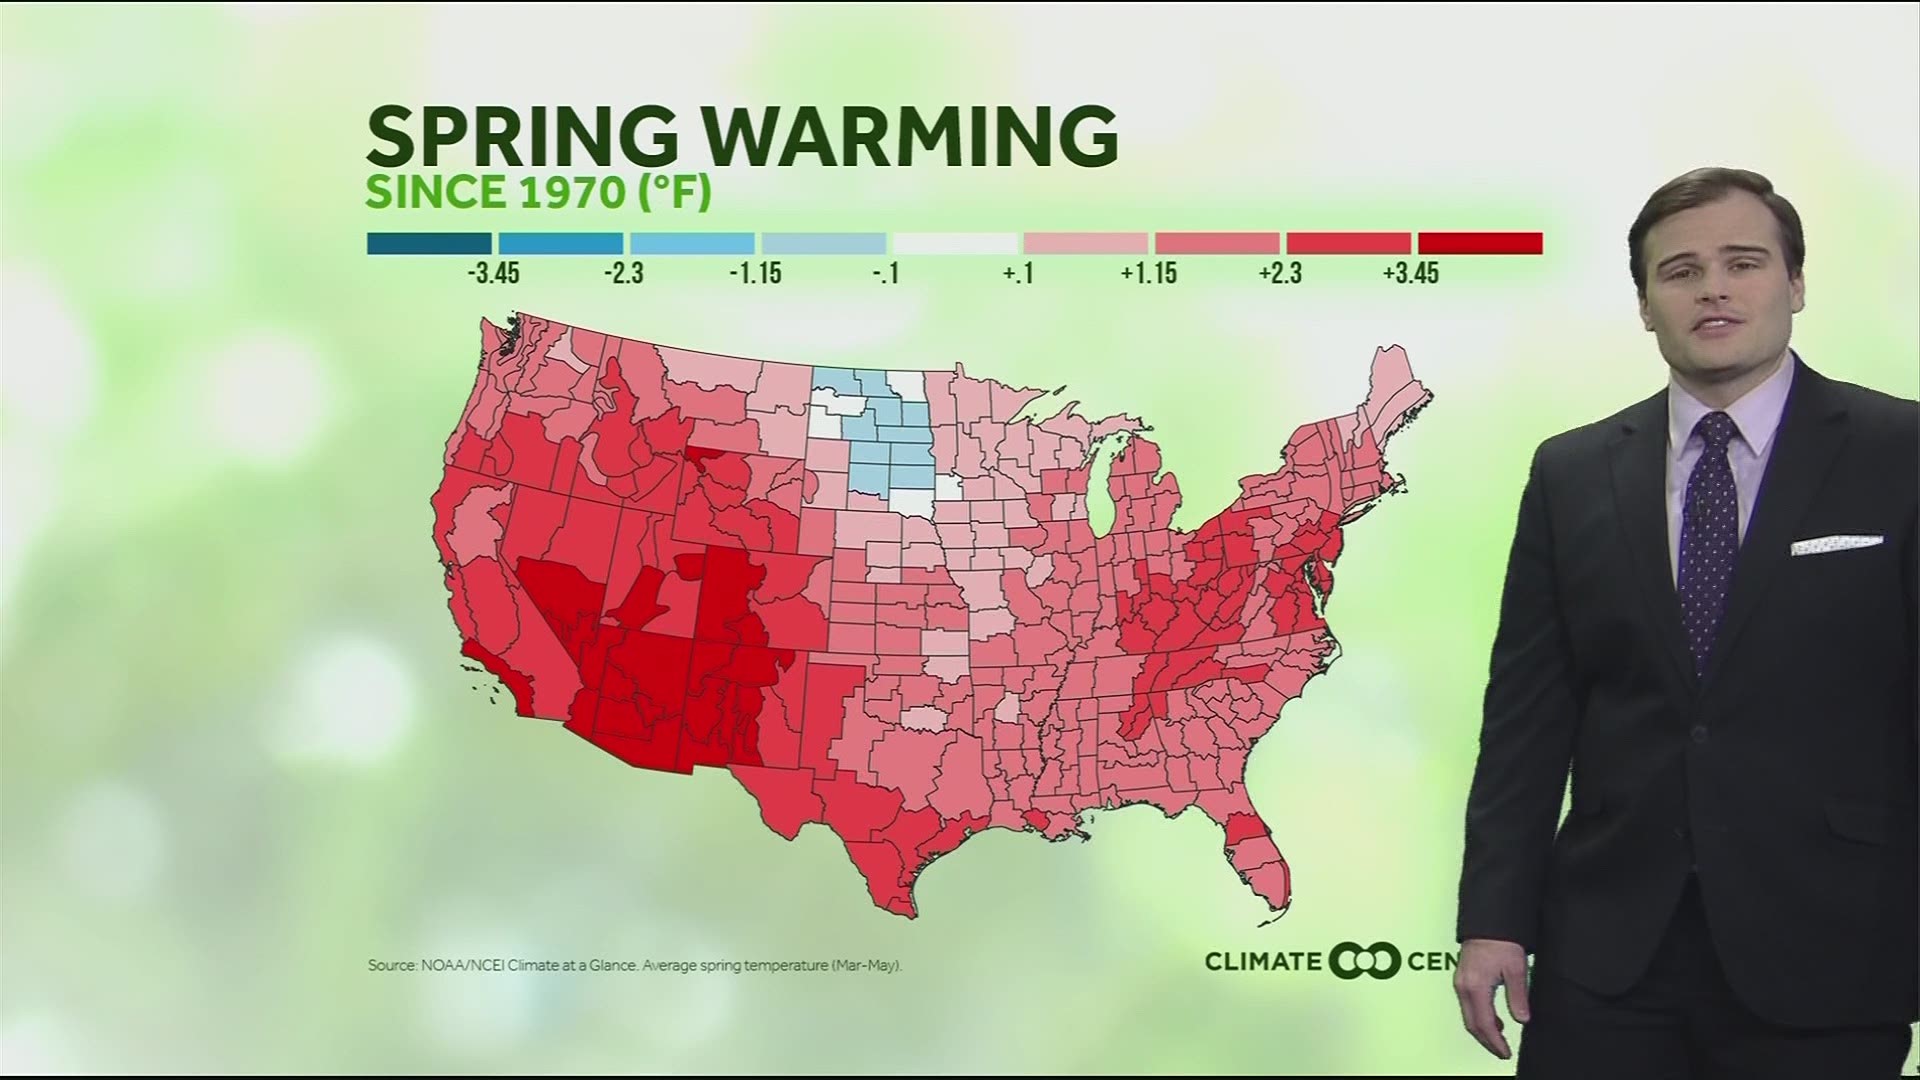 Climate Central released their 2021 spring package on Monday detailing how most of the United States has seen an increase in average temperatures since 1970.